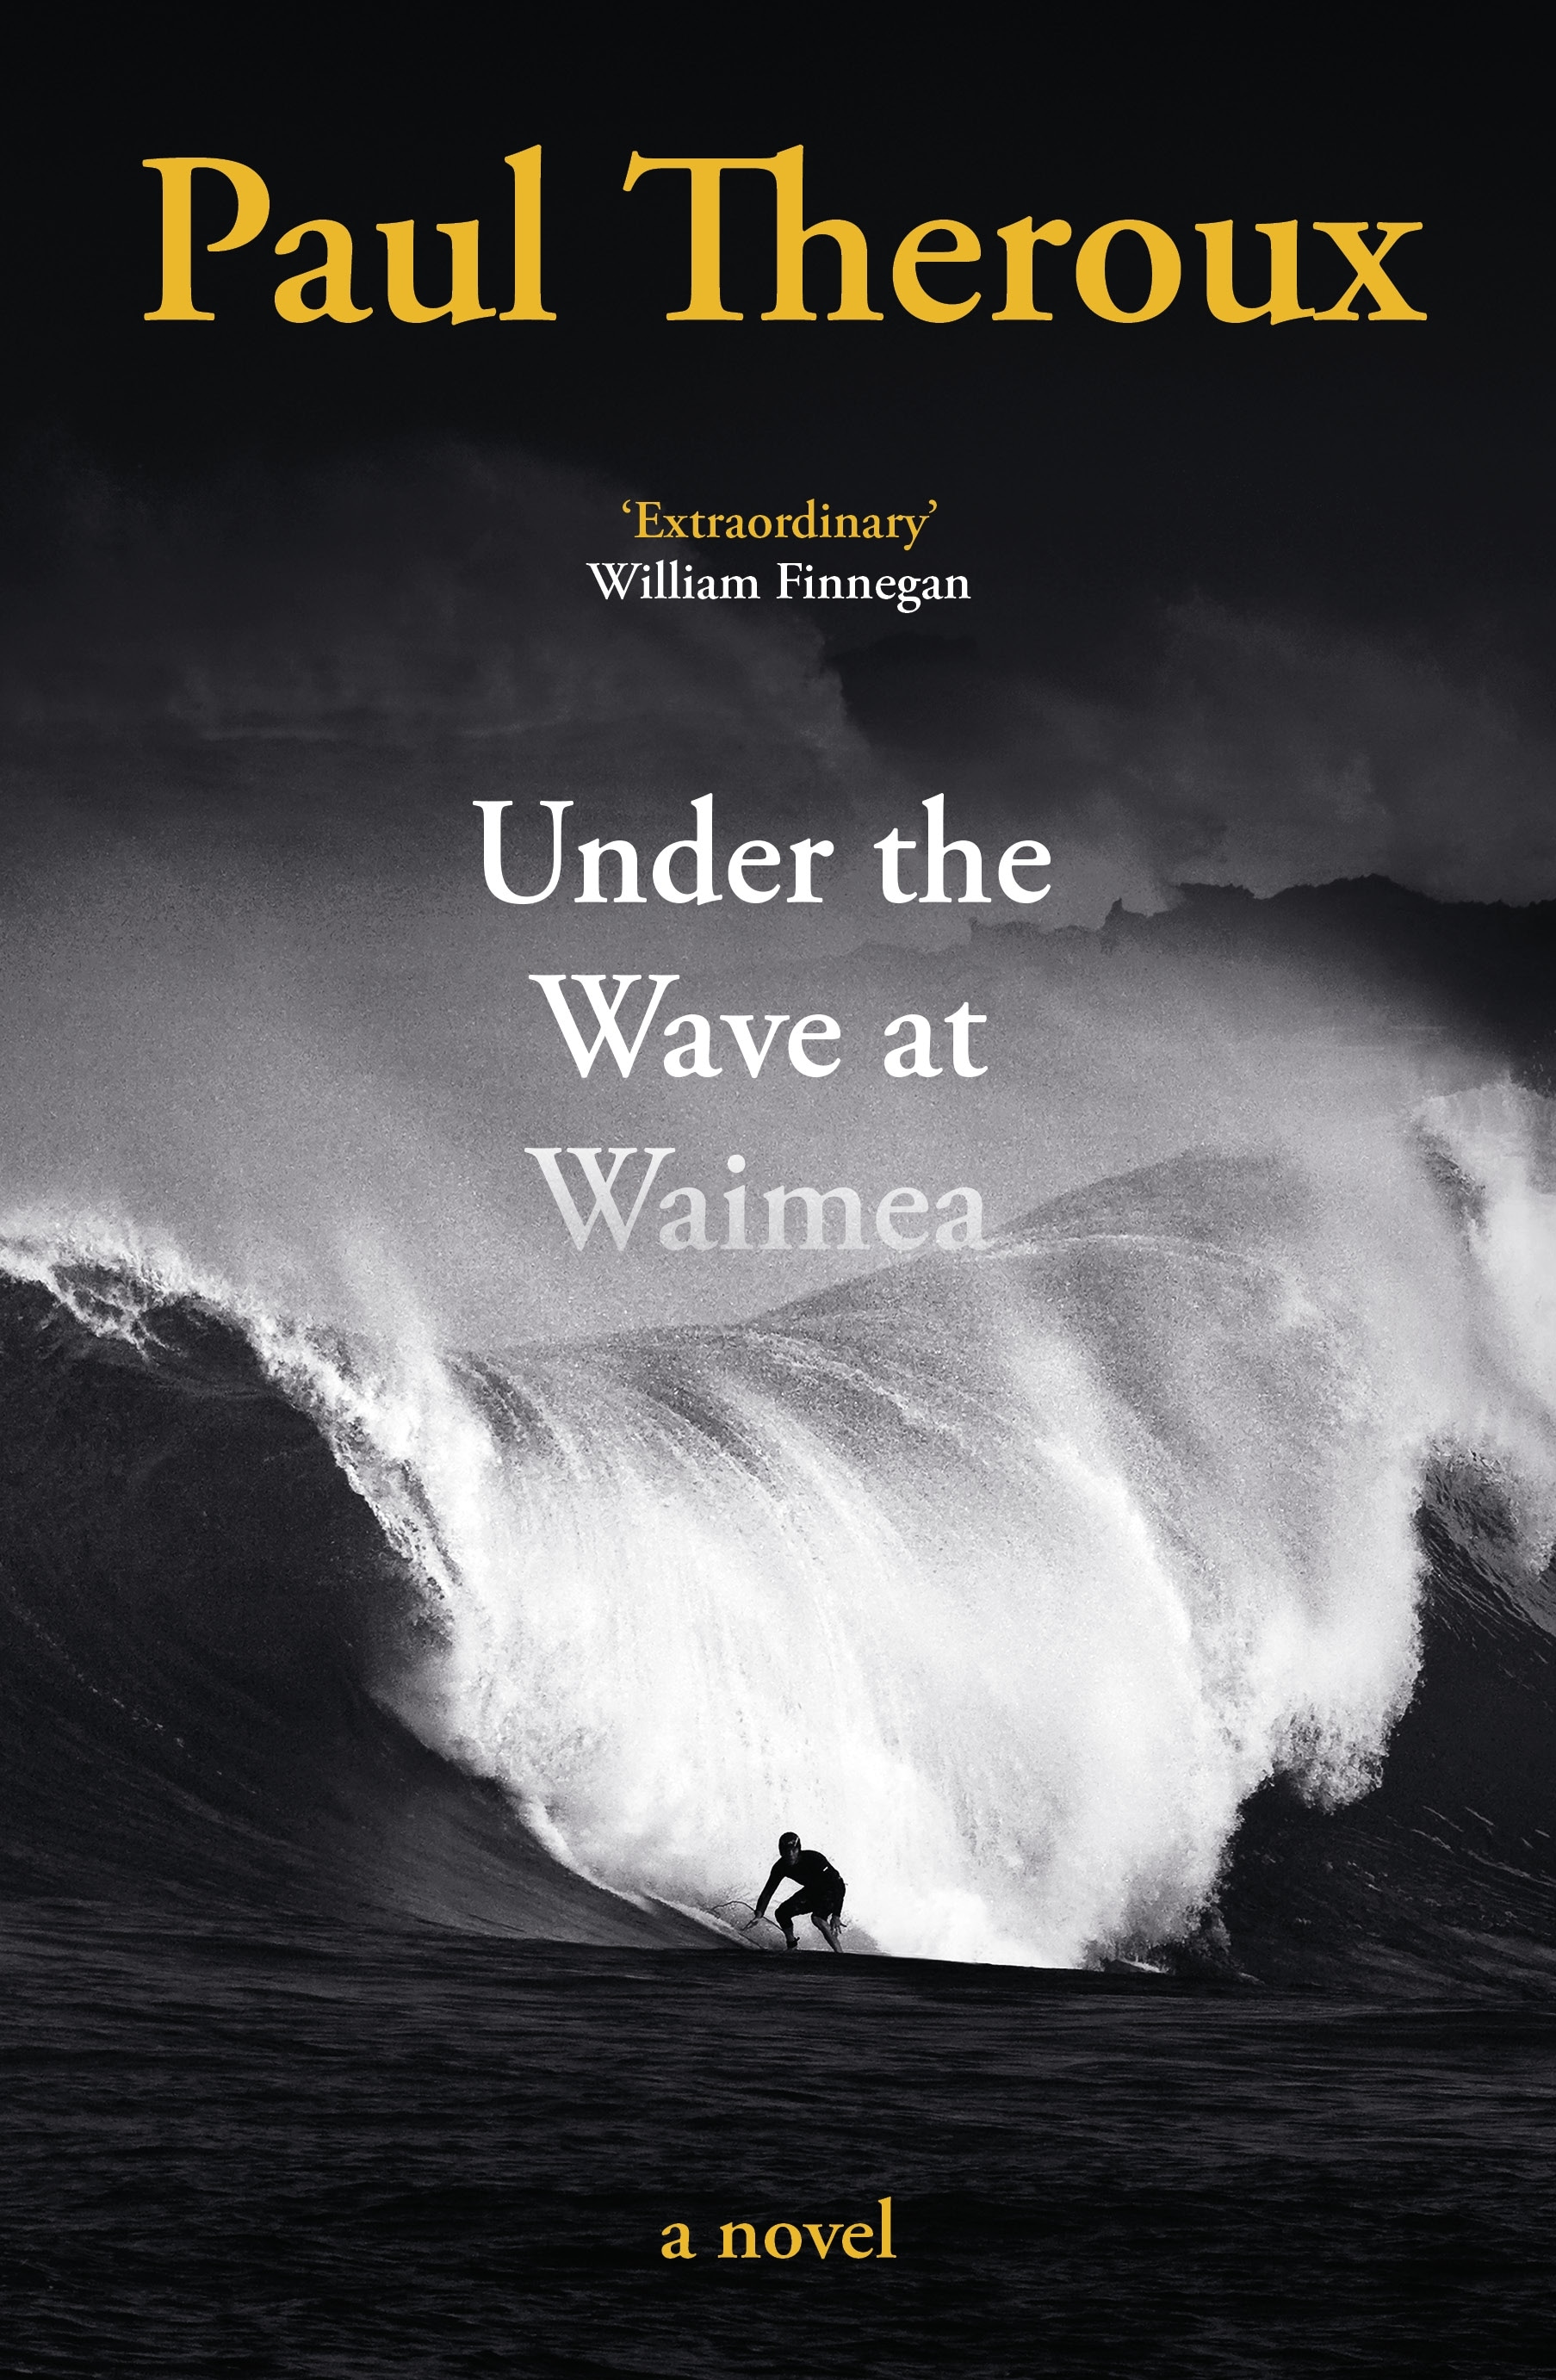 Book “Under the Wave at Waimea” by Paul Theroux — April 22, 2021